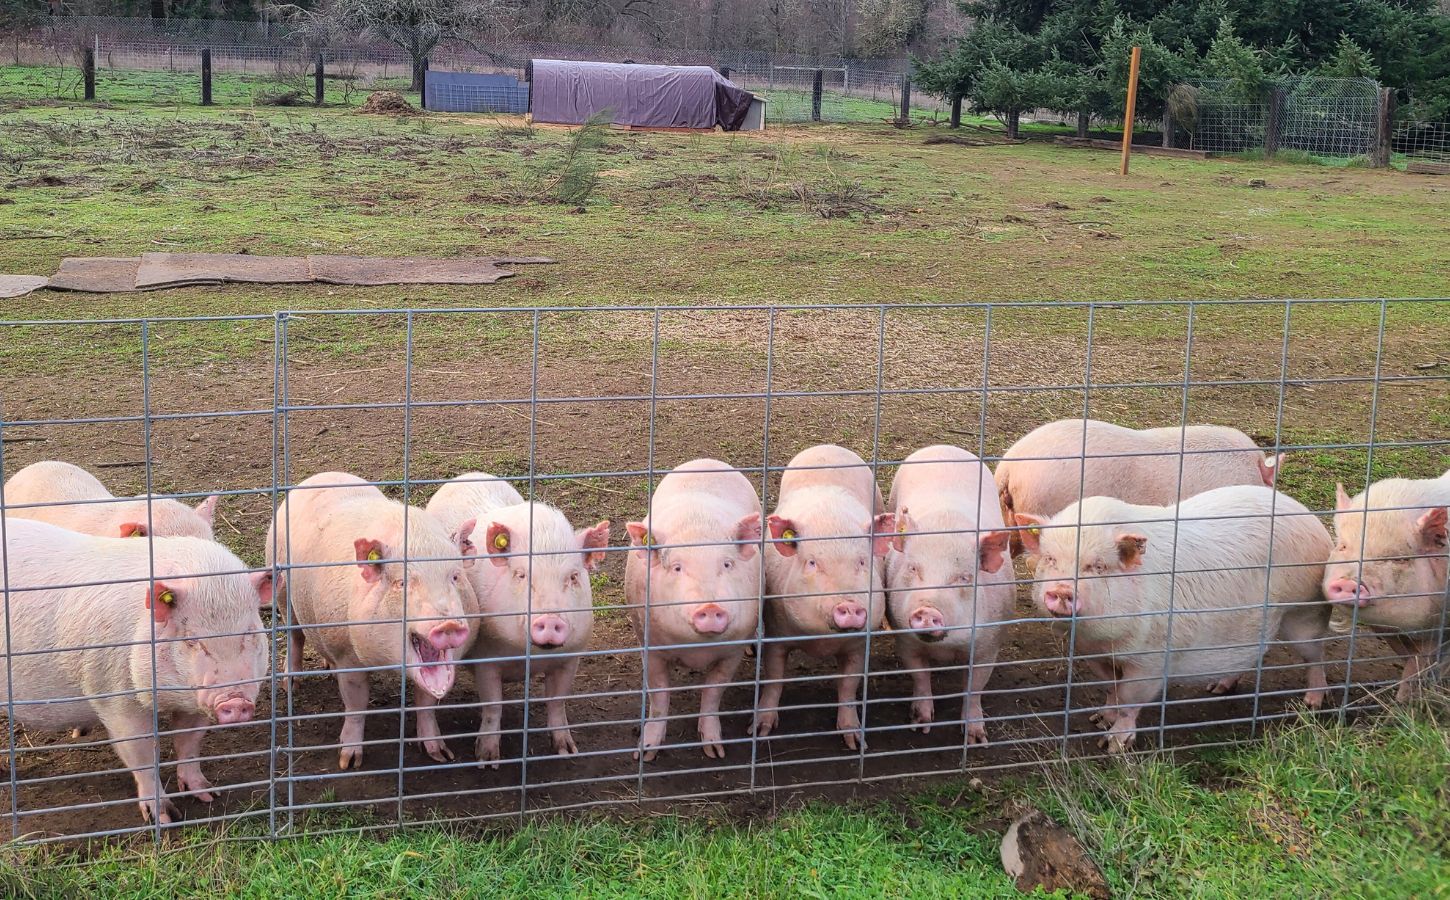 Ten pigs rescued from an animal testing lab